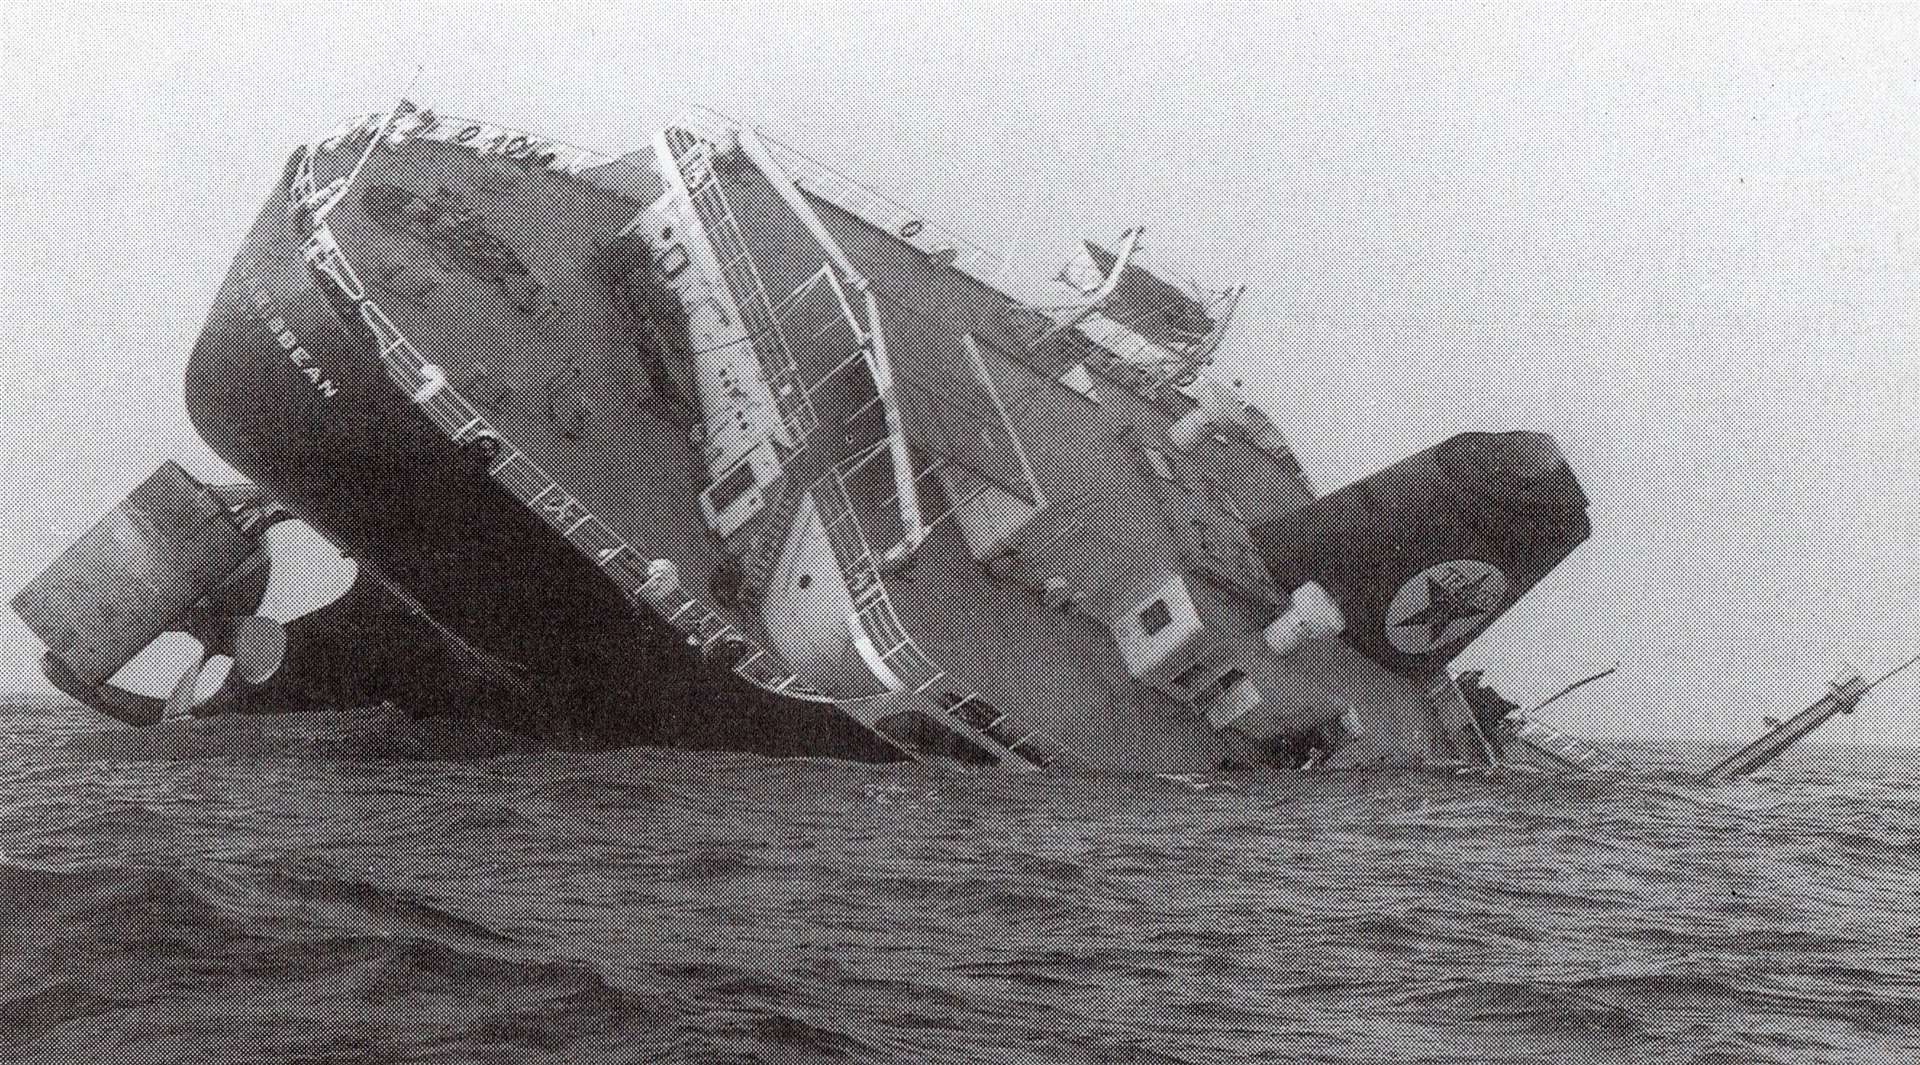 The Texico Caribbean sank after being in collision with the Paracas in 1971